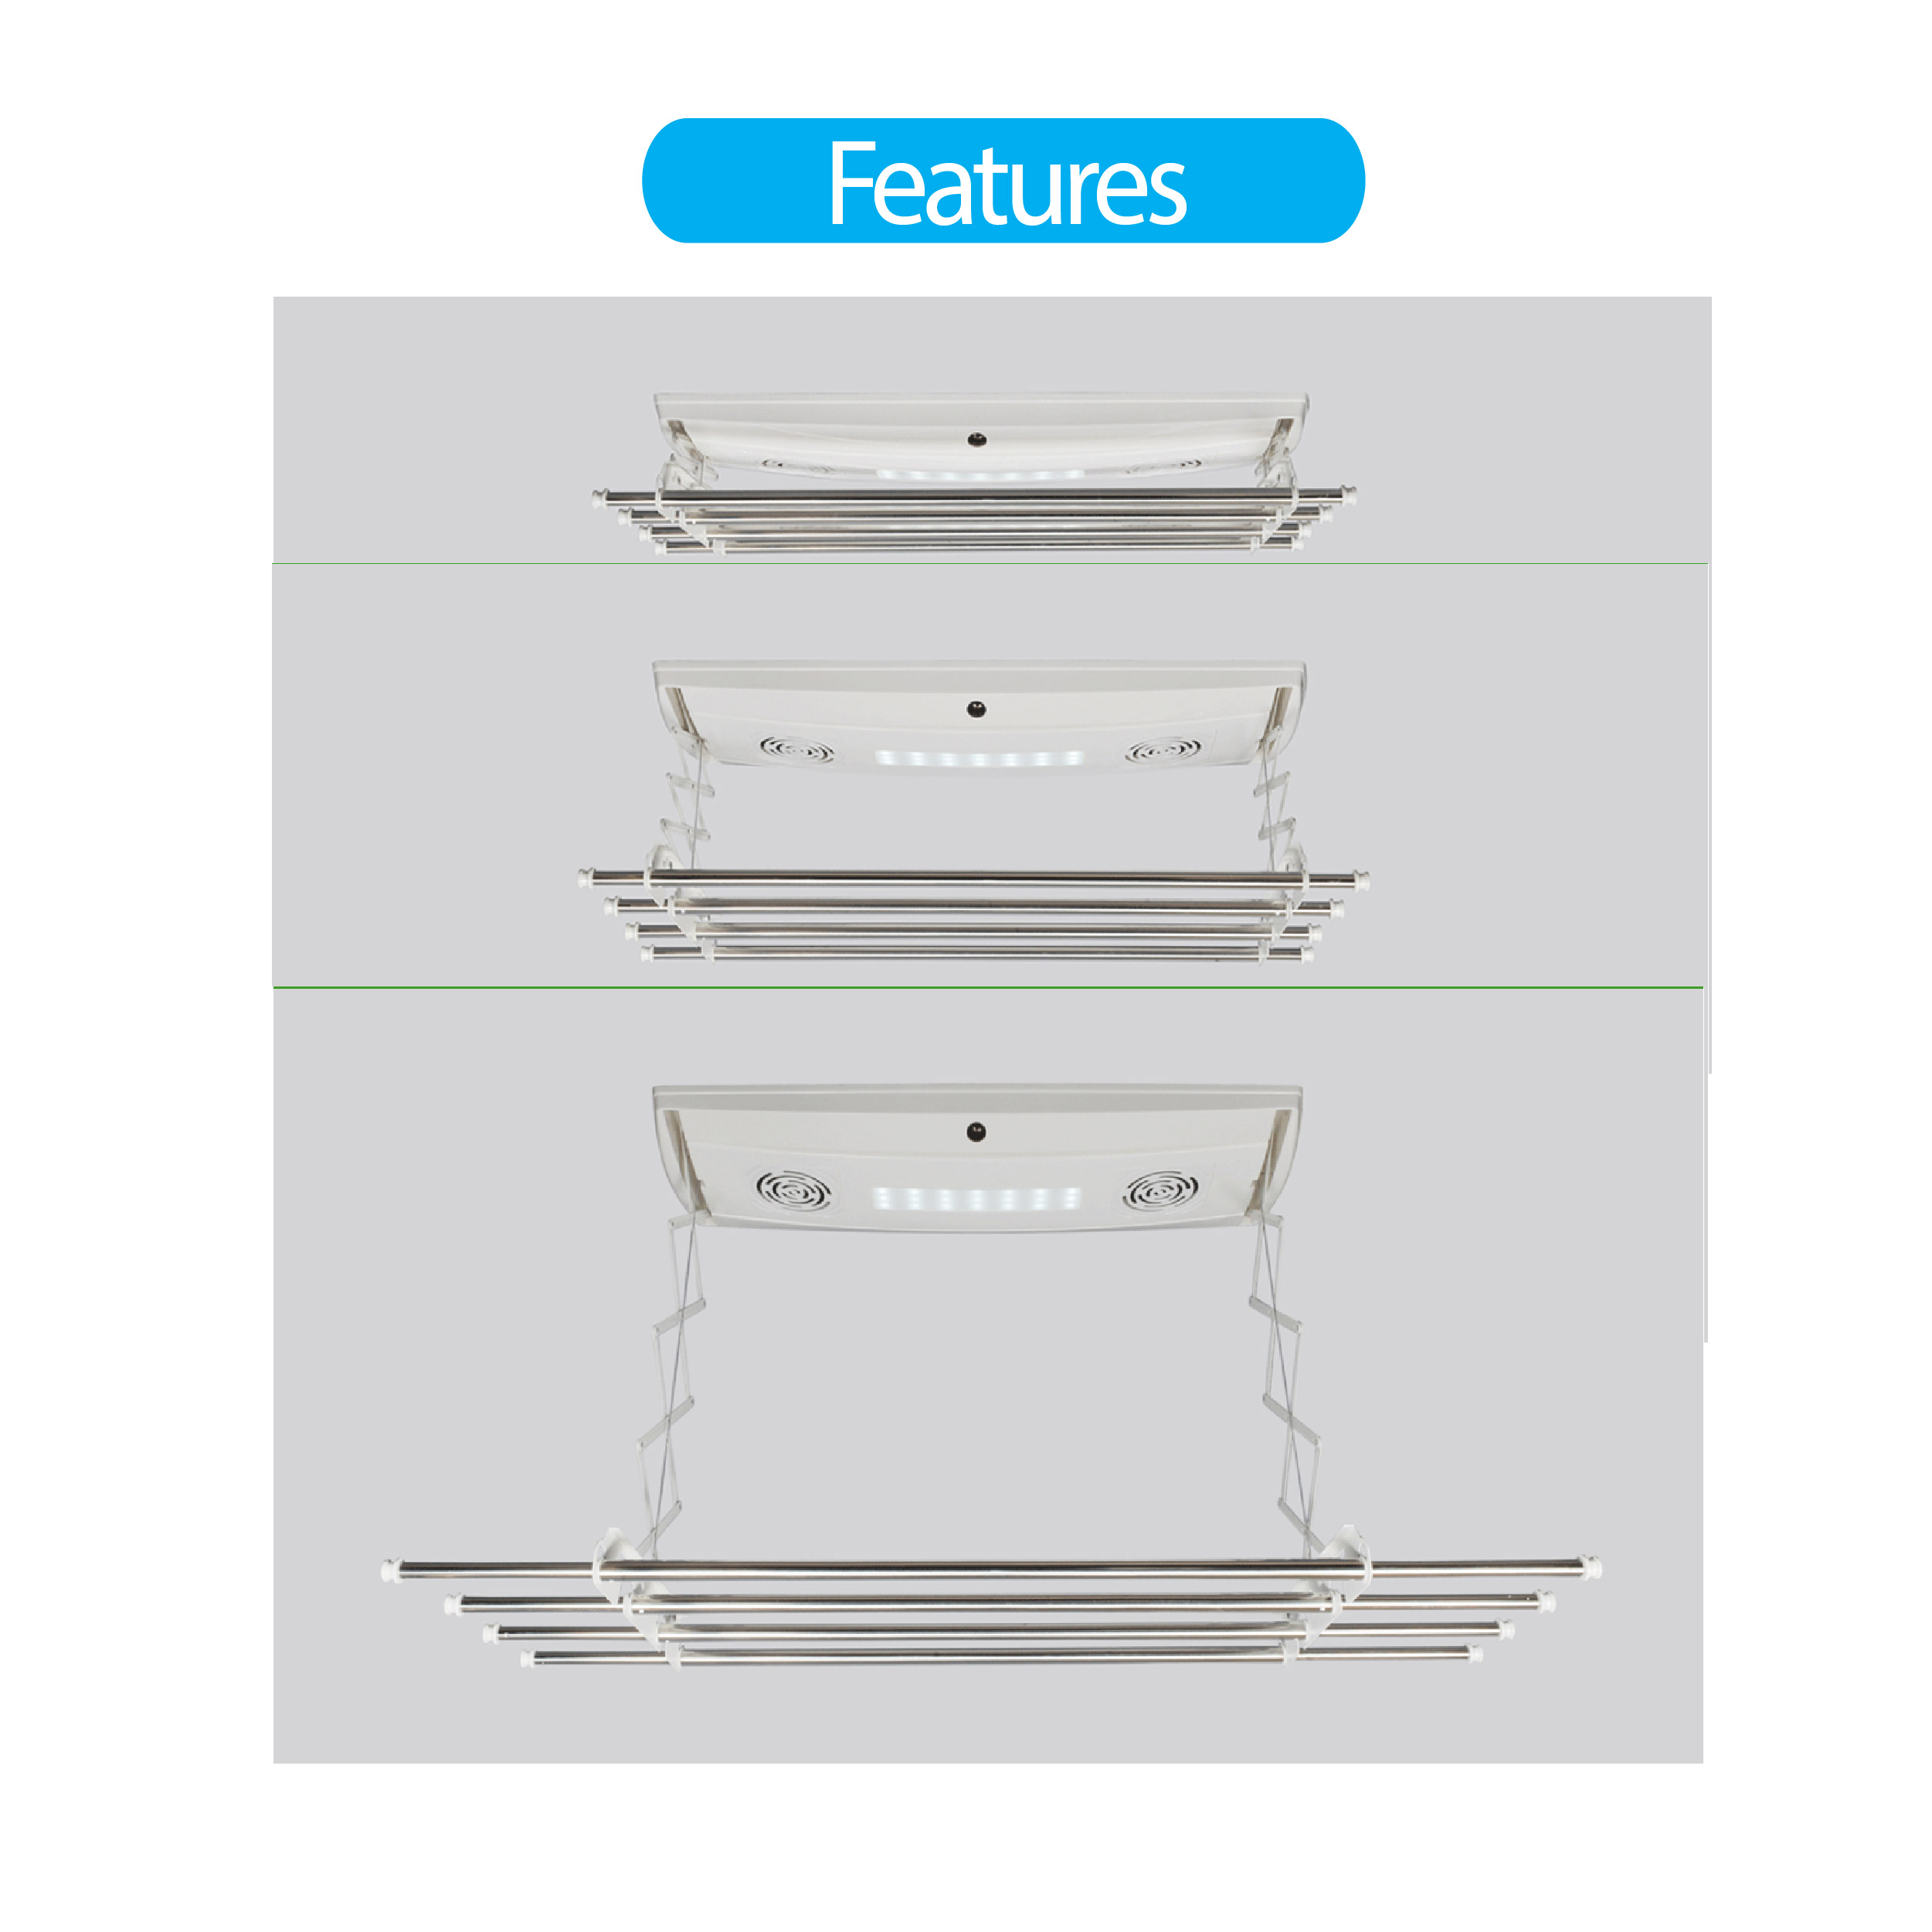 Ceiling Lifting Drying Rack|Automatic Ceiling Hangers|Bars